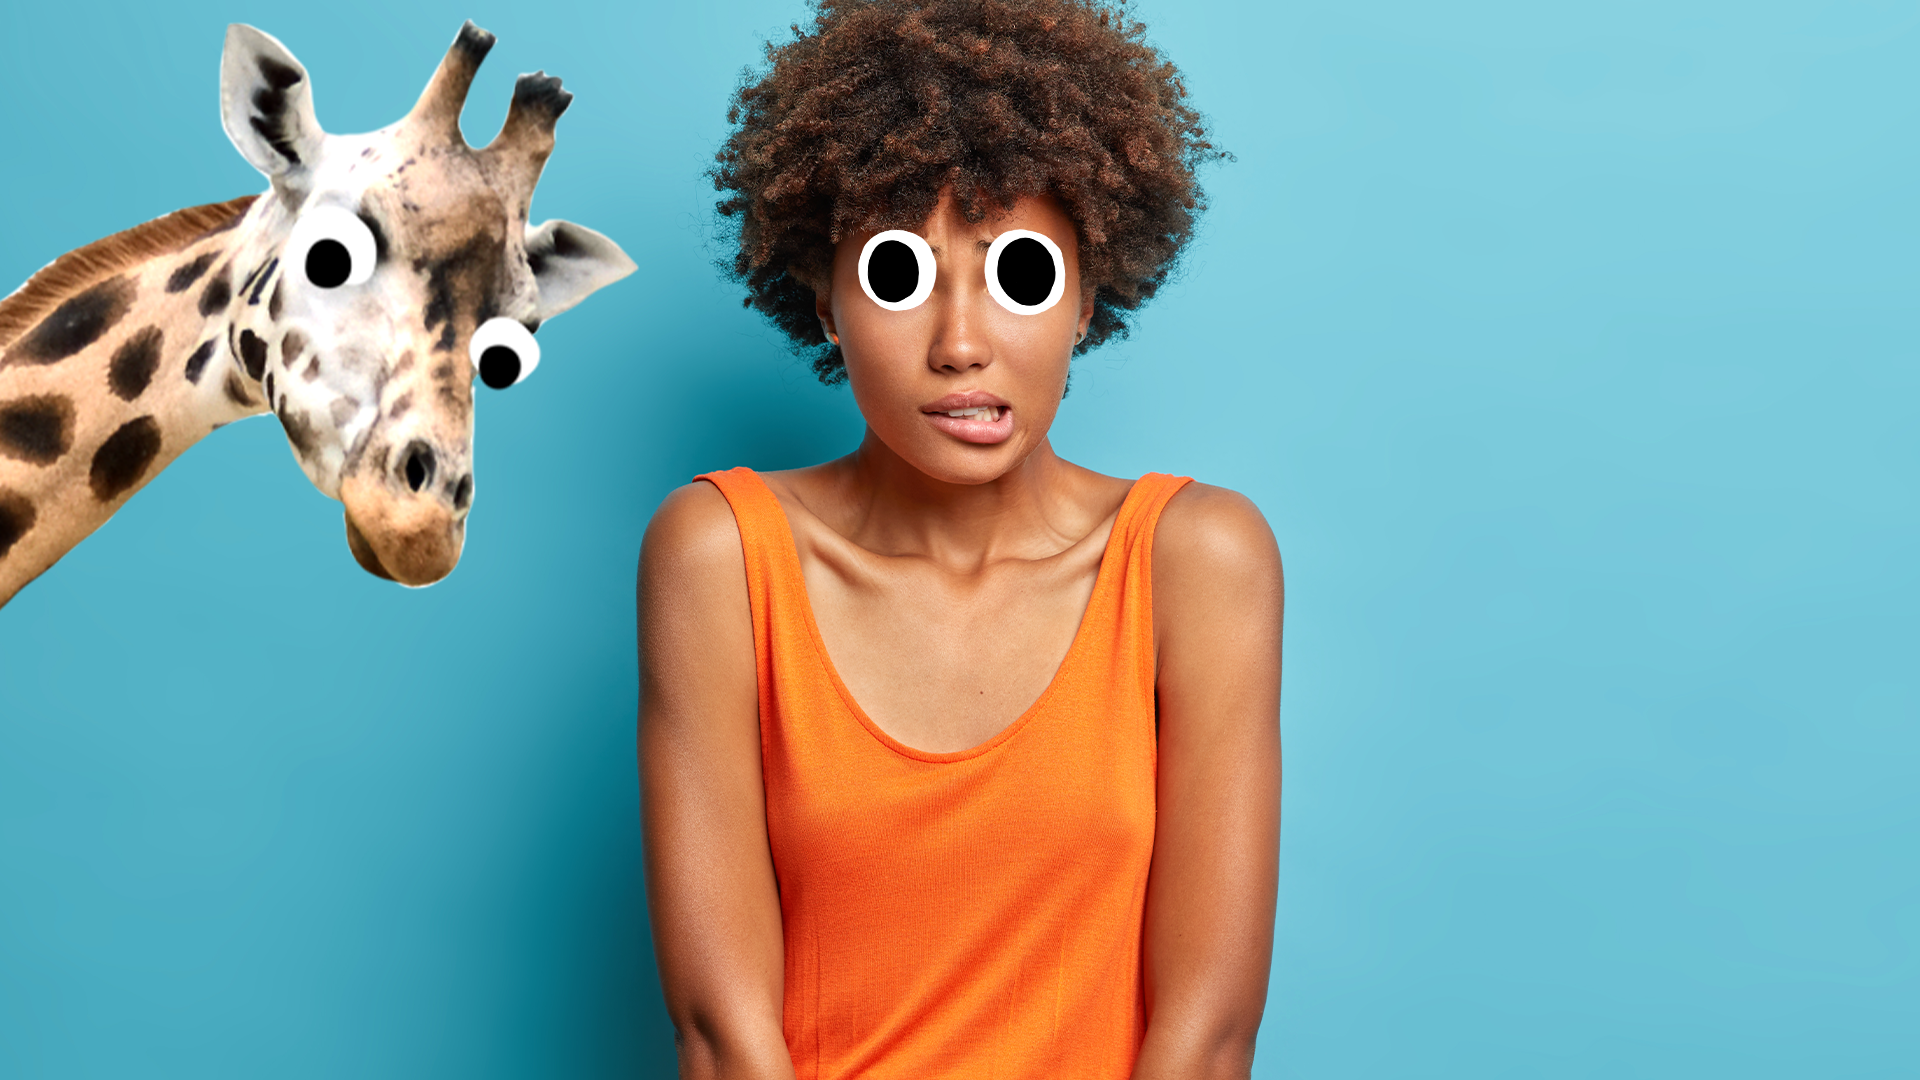 Woman looking guilty on a blue background with Beano giraffe